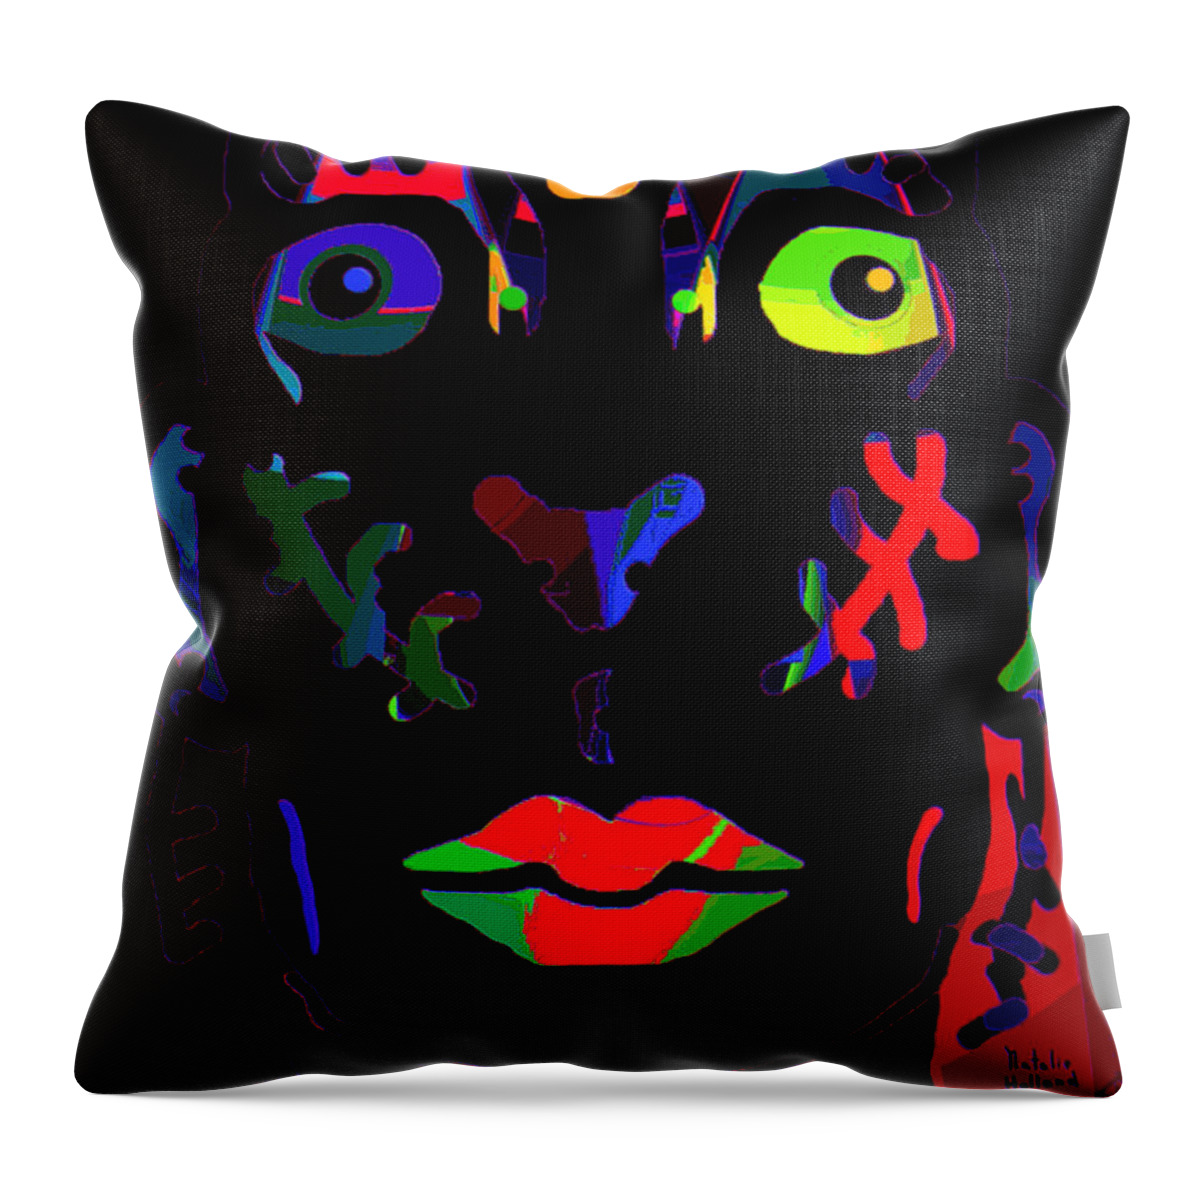 Jungle Man Throw Pillow featuring the mixed media Jungle Man by Natalie Holland